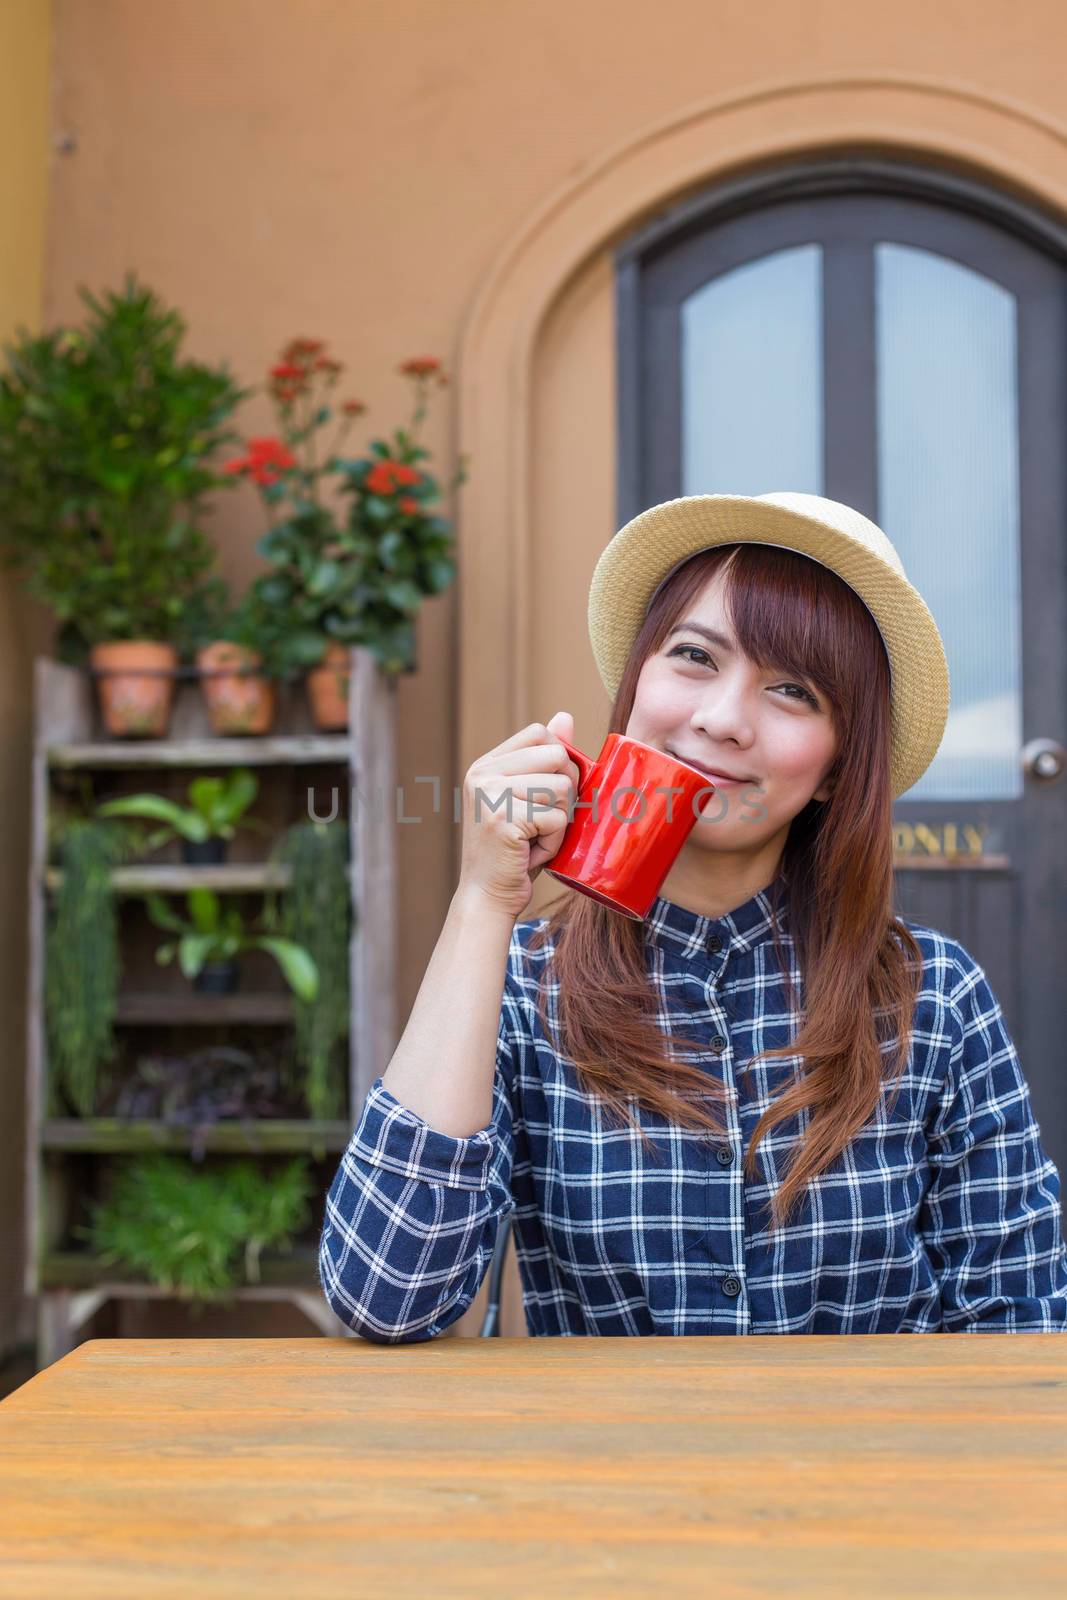 wear hat woman sitting in outdoor with warm drink relax